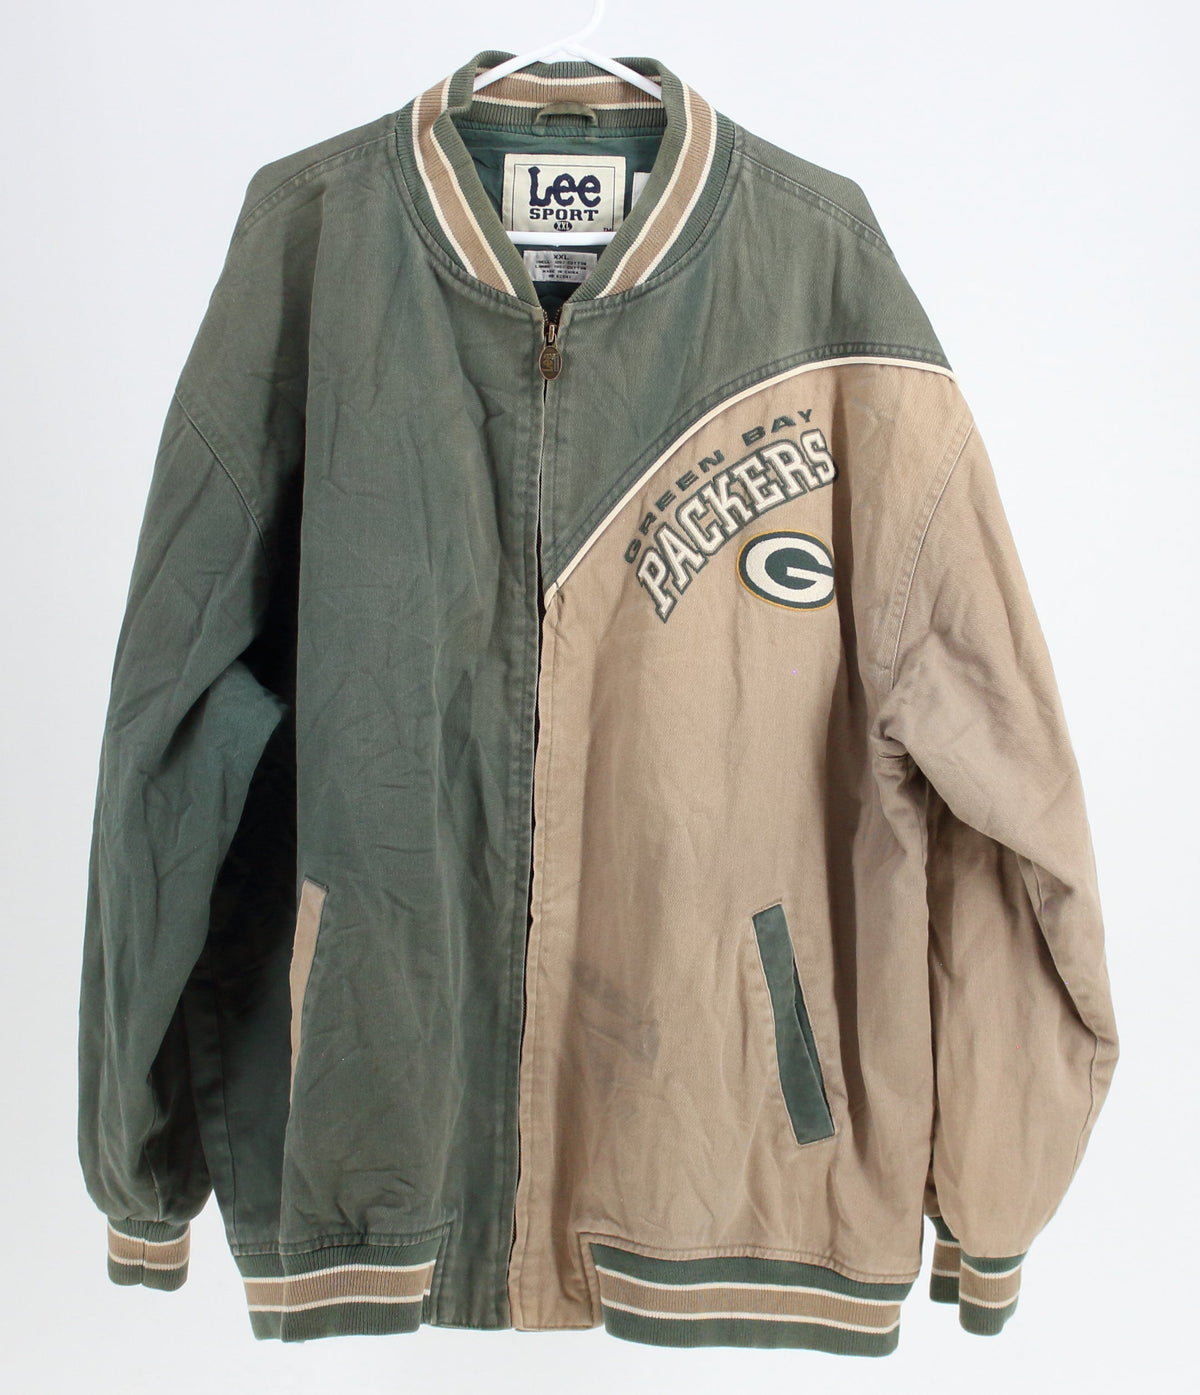 Lee Sport Green and Tan Packers Jacket